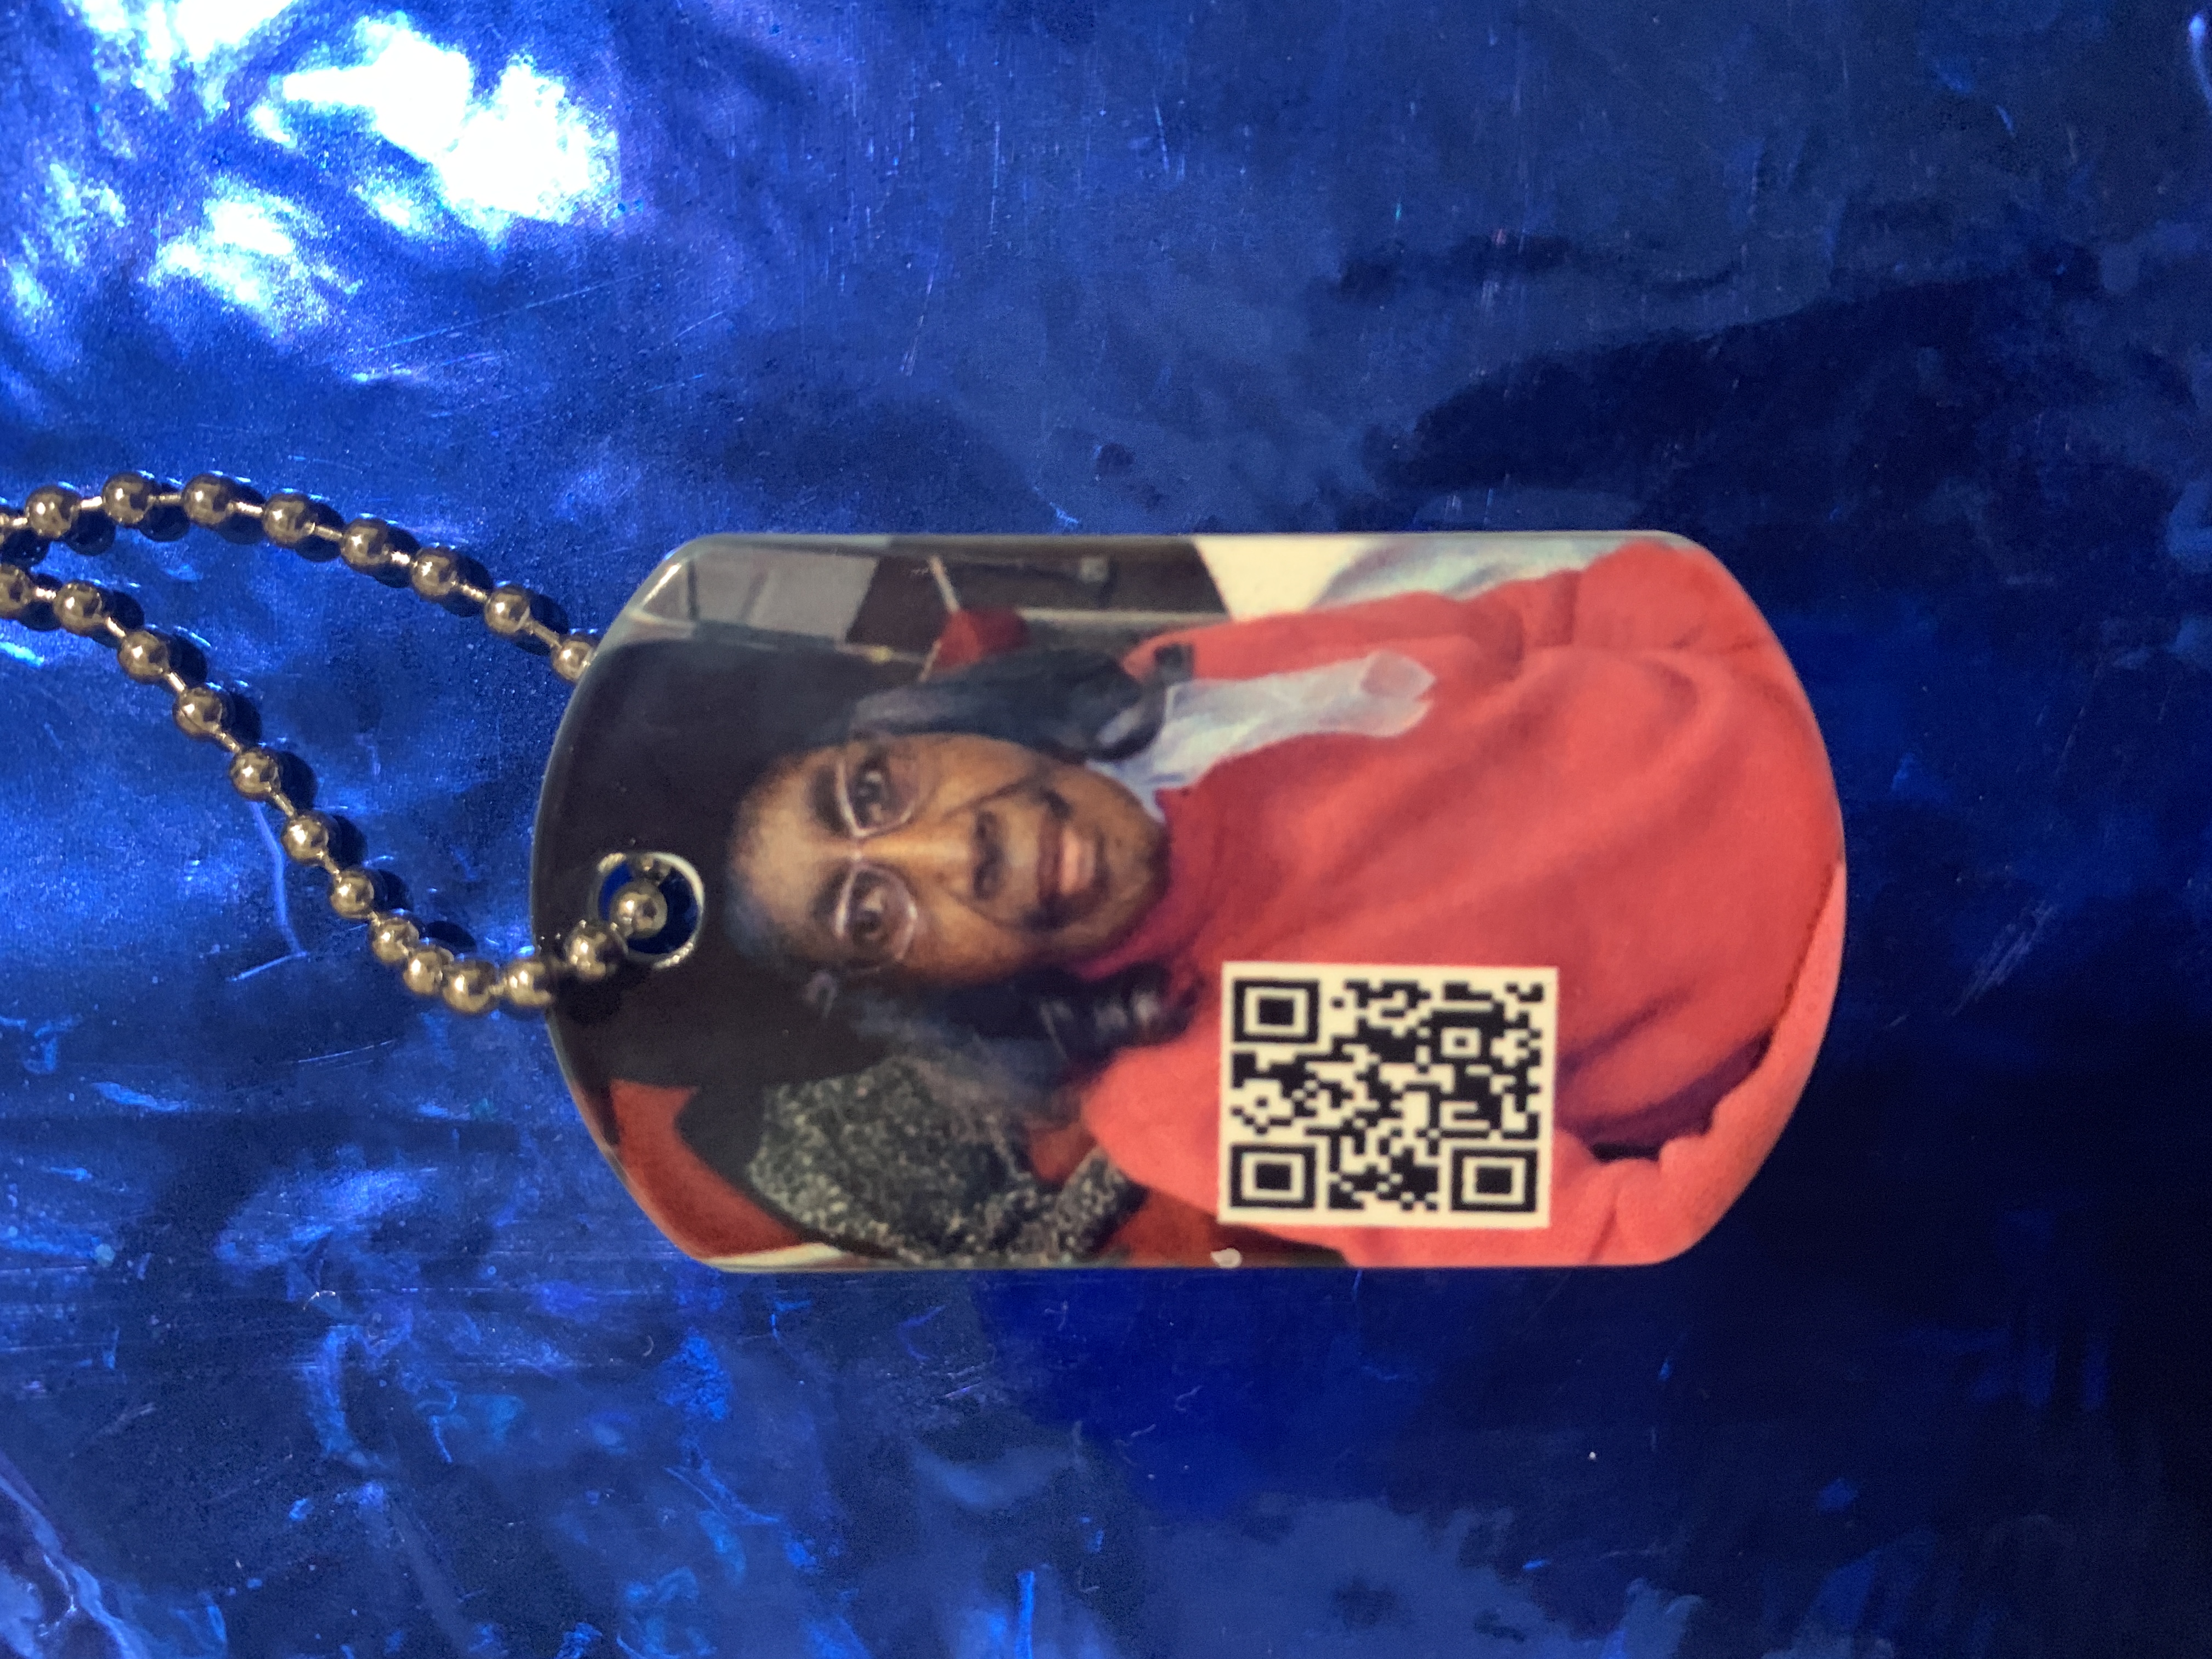 This 2 sided dog tag has a scannable QRcode attached to it that will allow people to hear memor